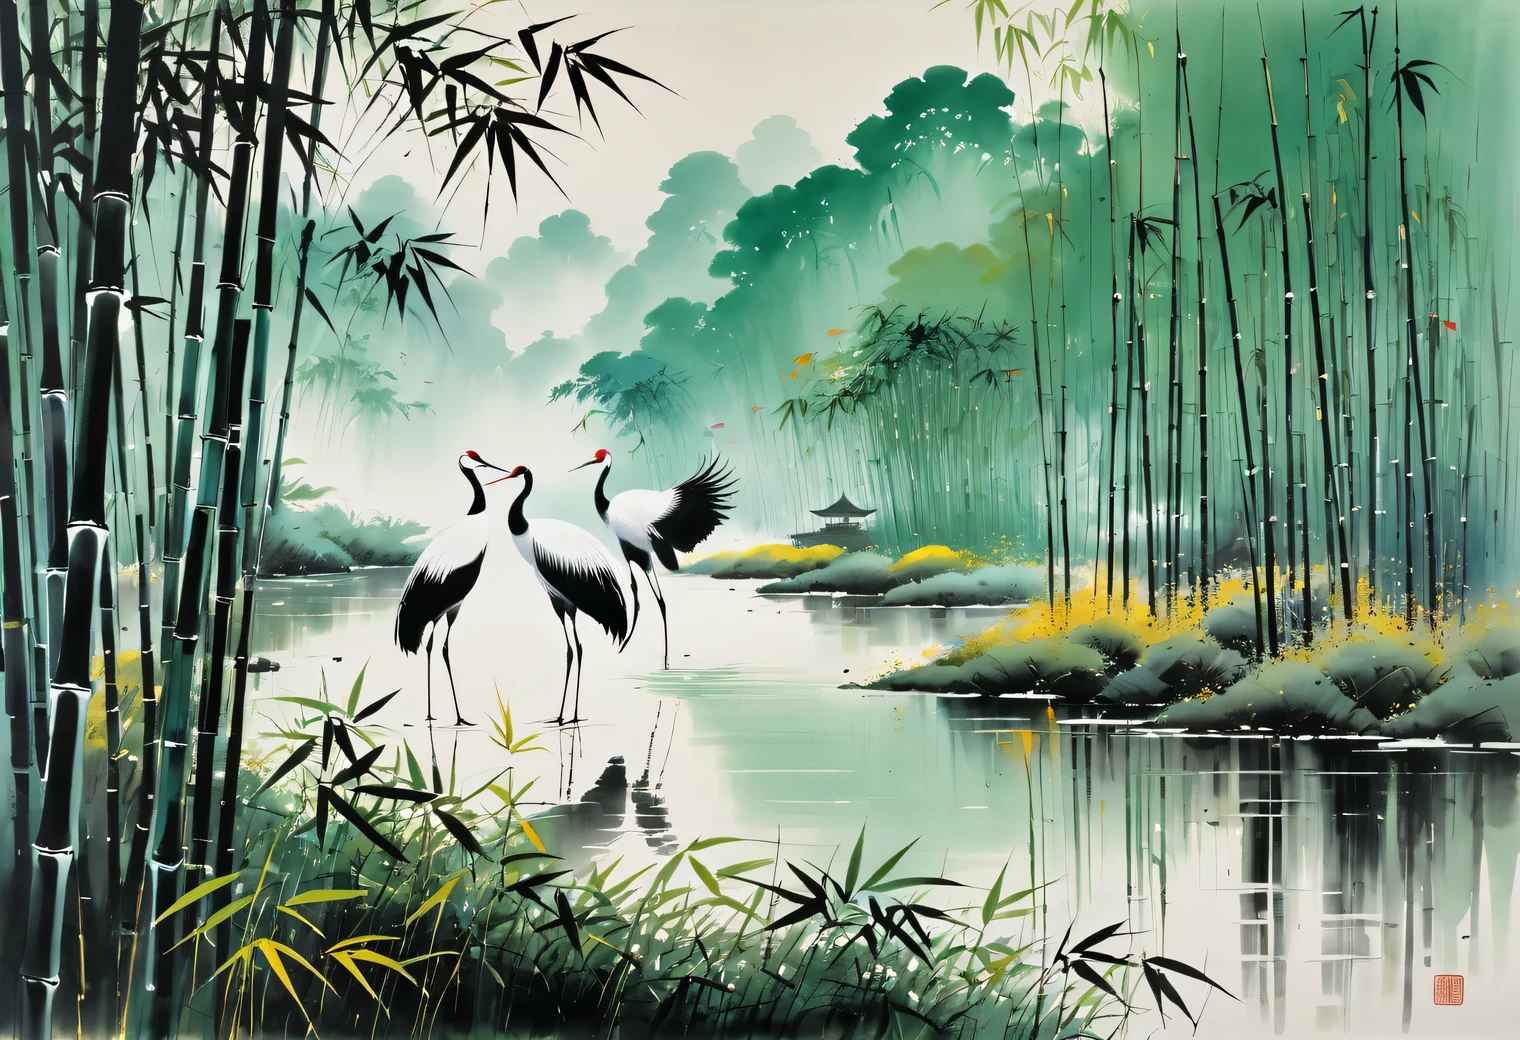 Wu Guanzhong paints a picture, the painting depicts a crane, dancing in the bamboo thickets, full compliance with the style of Wu Guanzhong, combining traditional Chinese ink painting techniques with Western painting concepts, unique visual effects using color and lines.